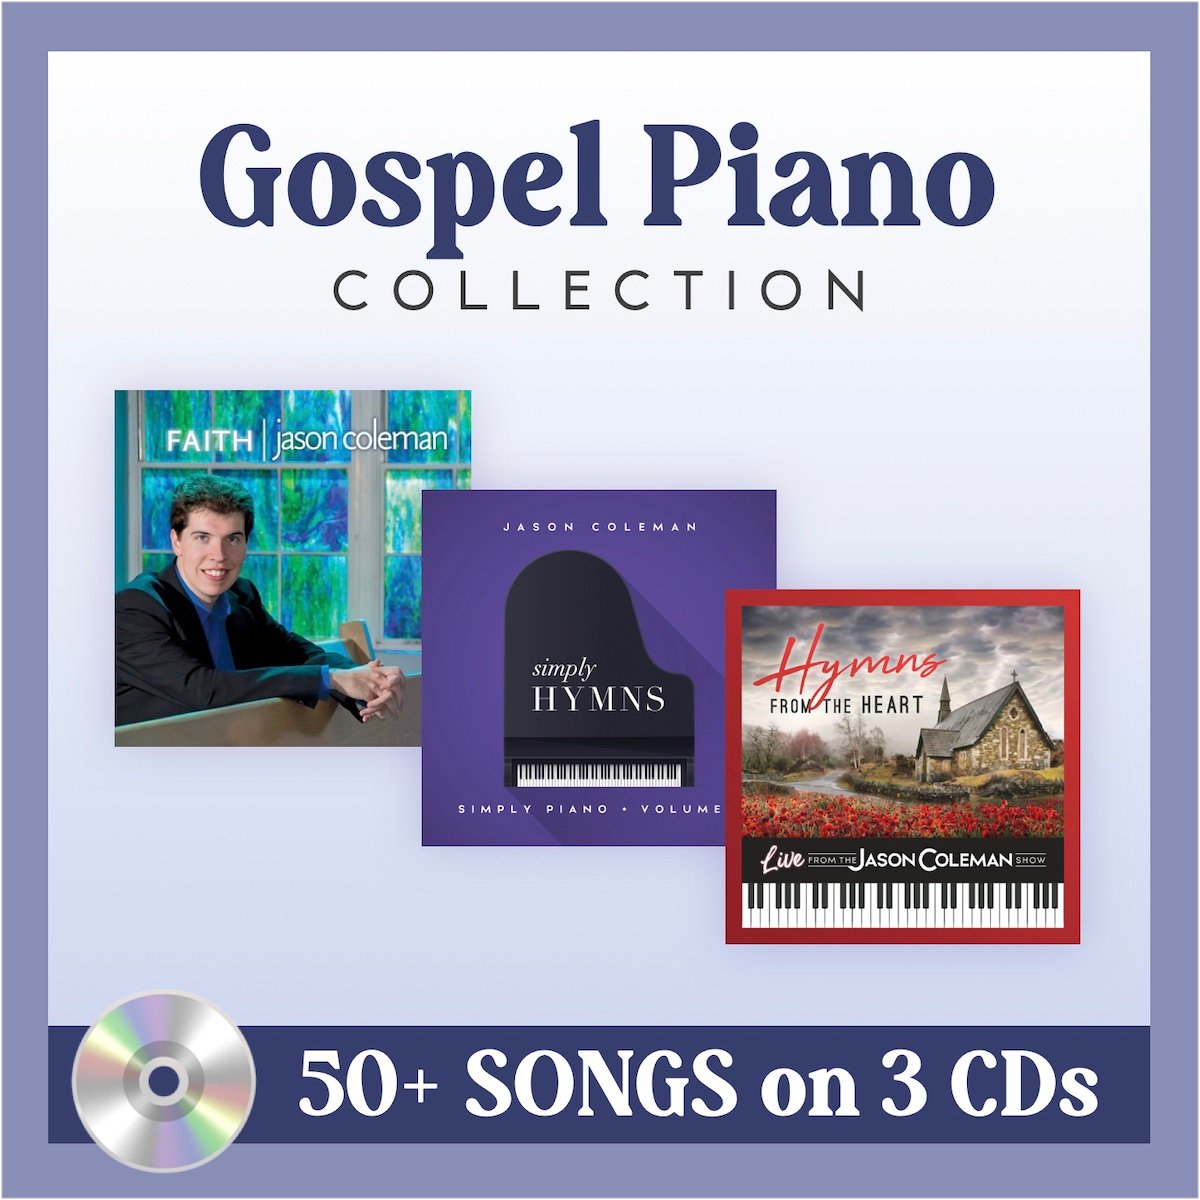 Gospel Piano 3-CD Collection (Save $10)